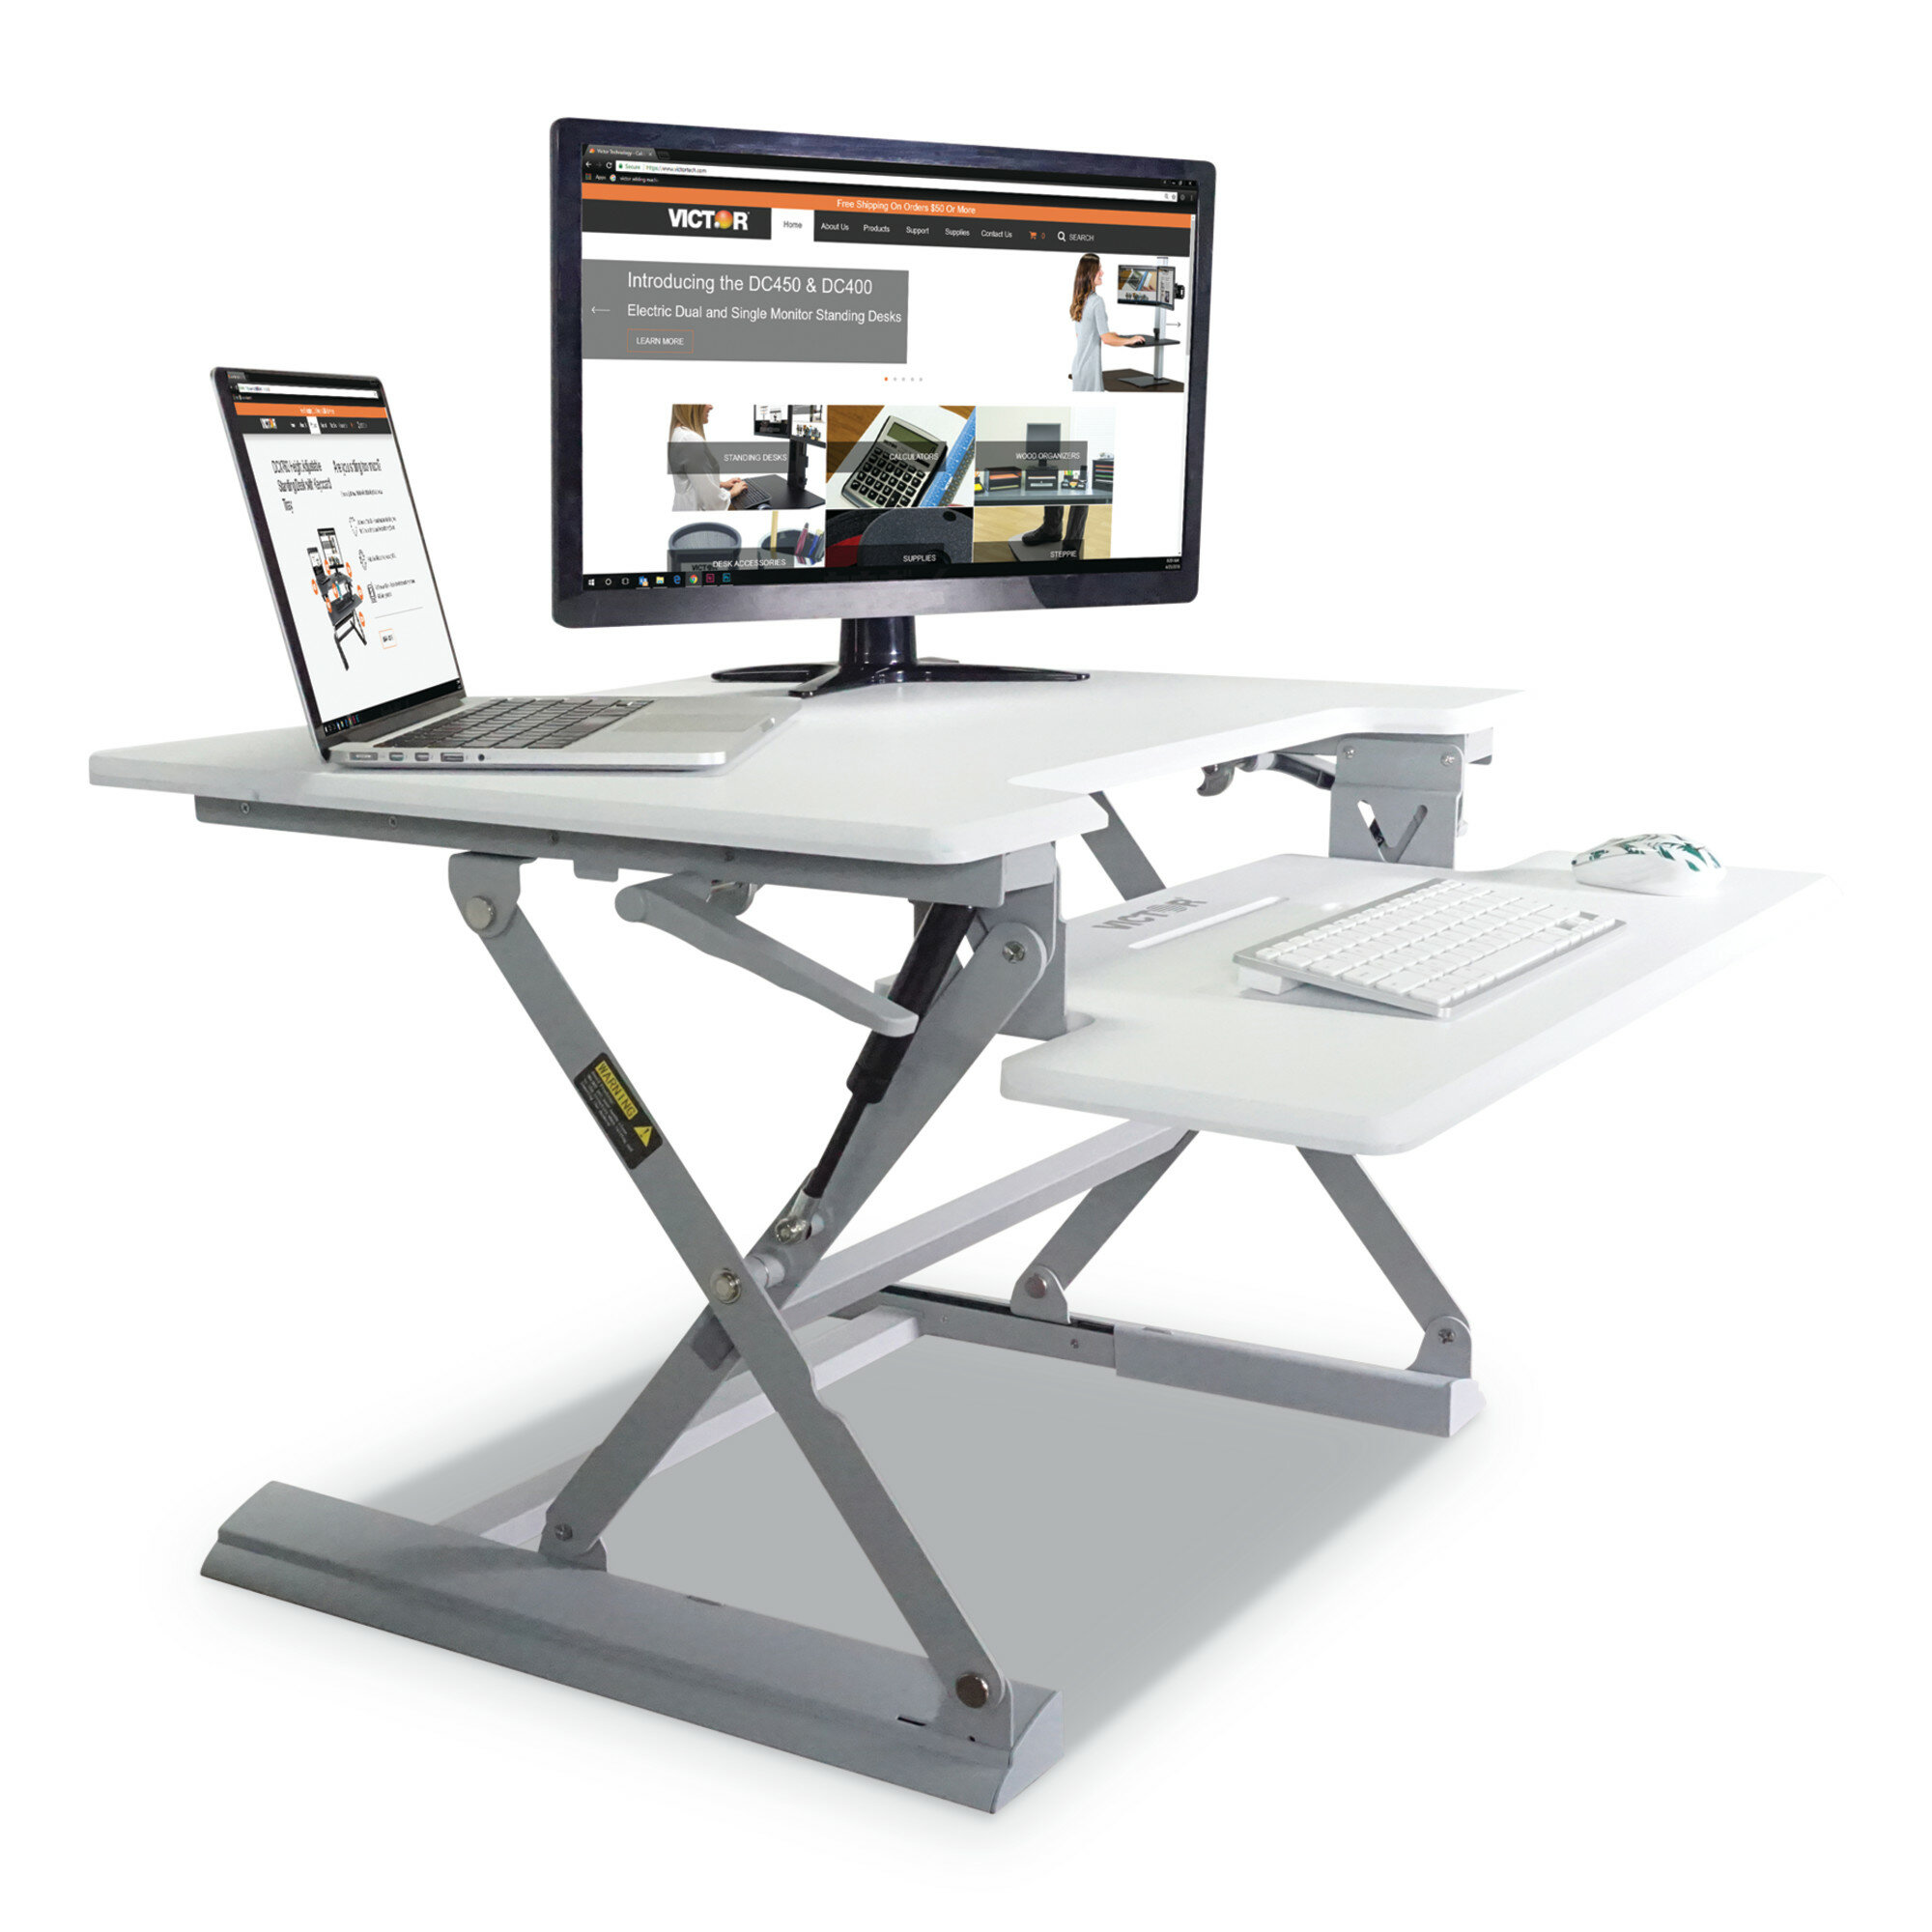 Symple Stuff Opperman Standing Desk Conversion Unit With Keyboard